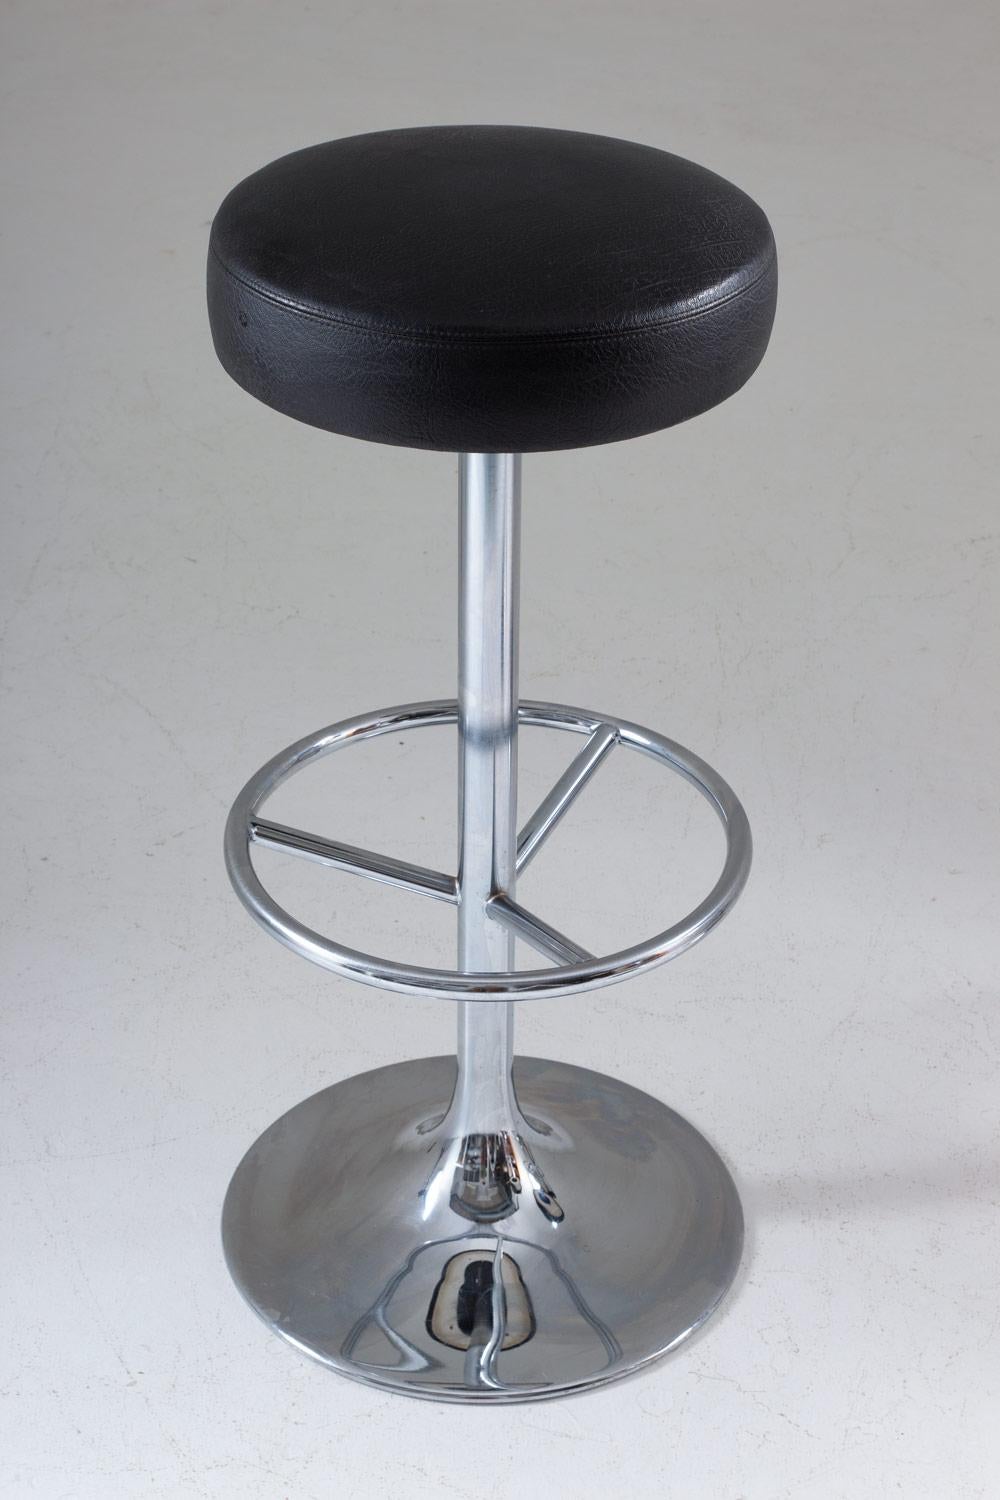 A set of three high-quality bar stools manufactured by Johanson Design in Markaryd. These stools feature a comfortable faux-leather seat on a chrome-colored metal Stand. The stools don't swivel.
Condition: Very good vintage condition.
  